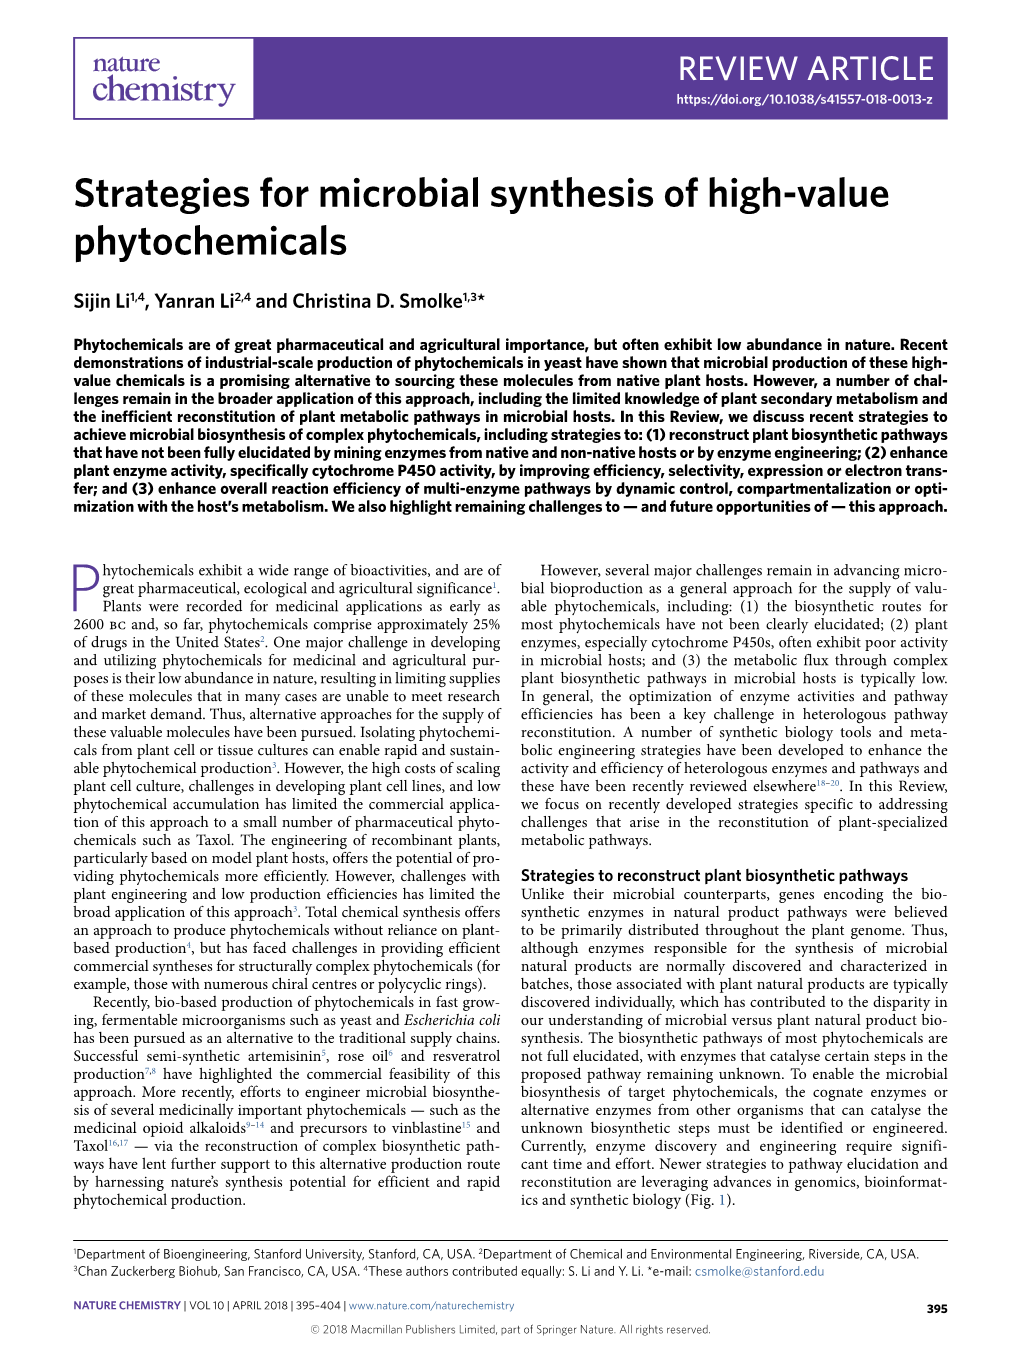 Strategies for Microbial Synthesis of High-Value Phytochemicals